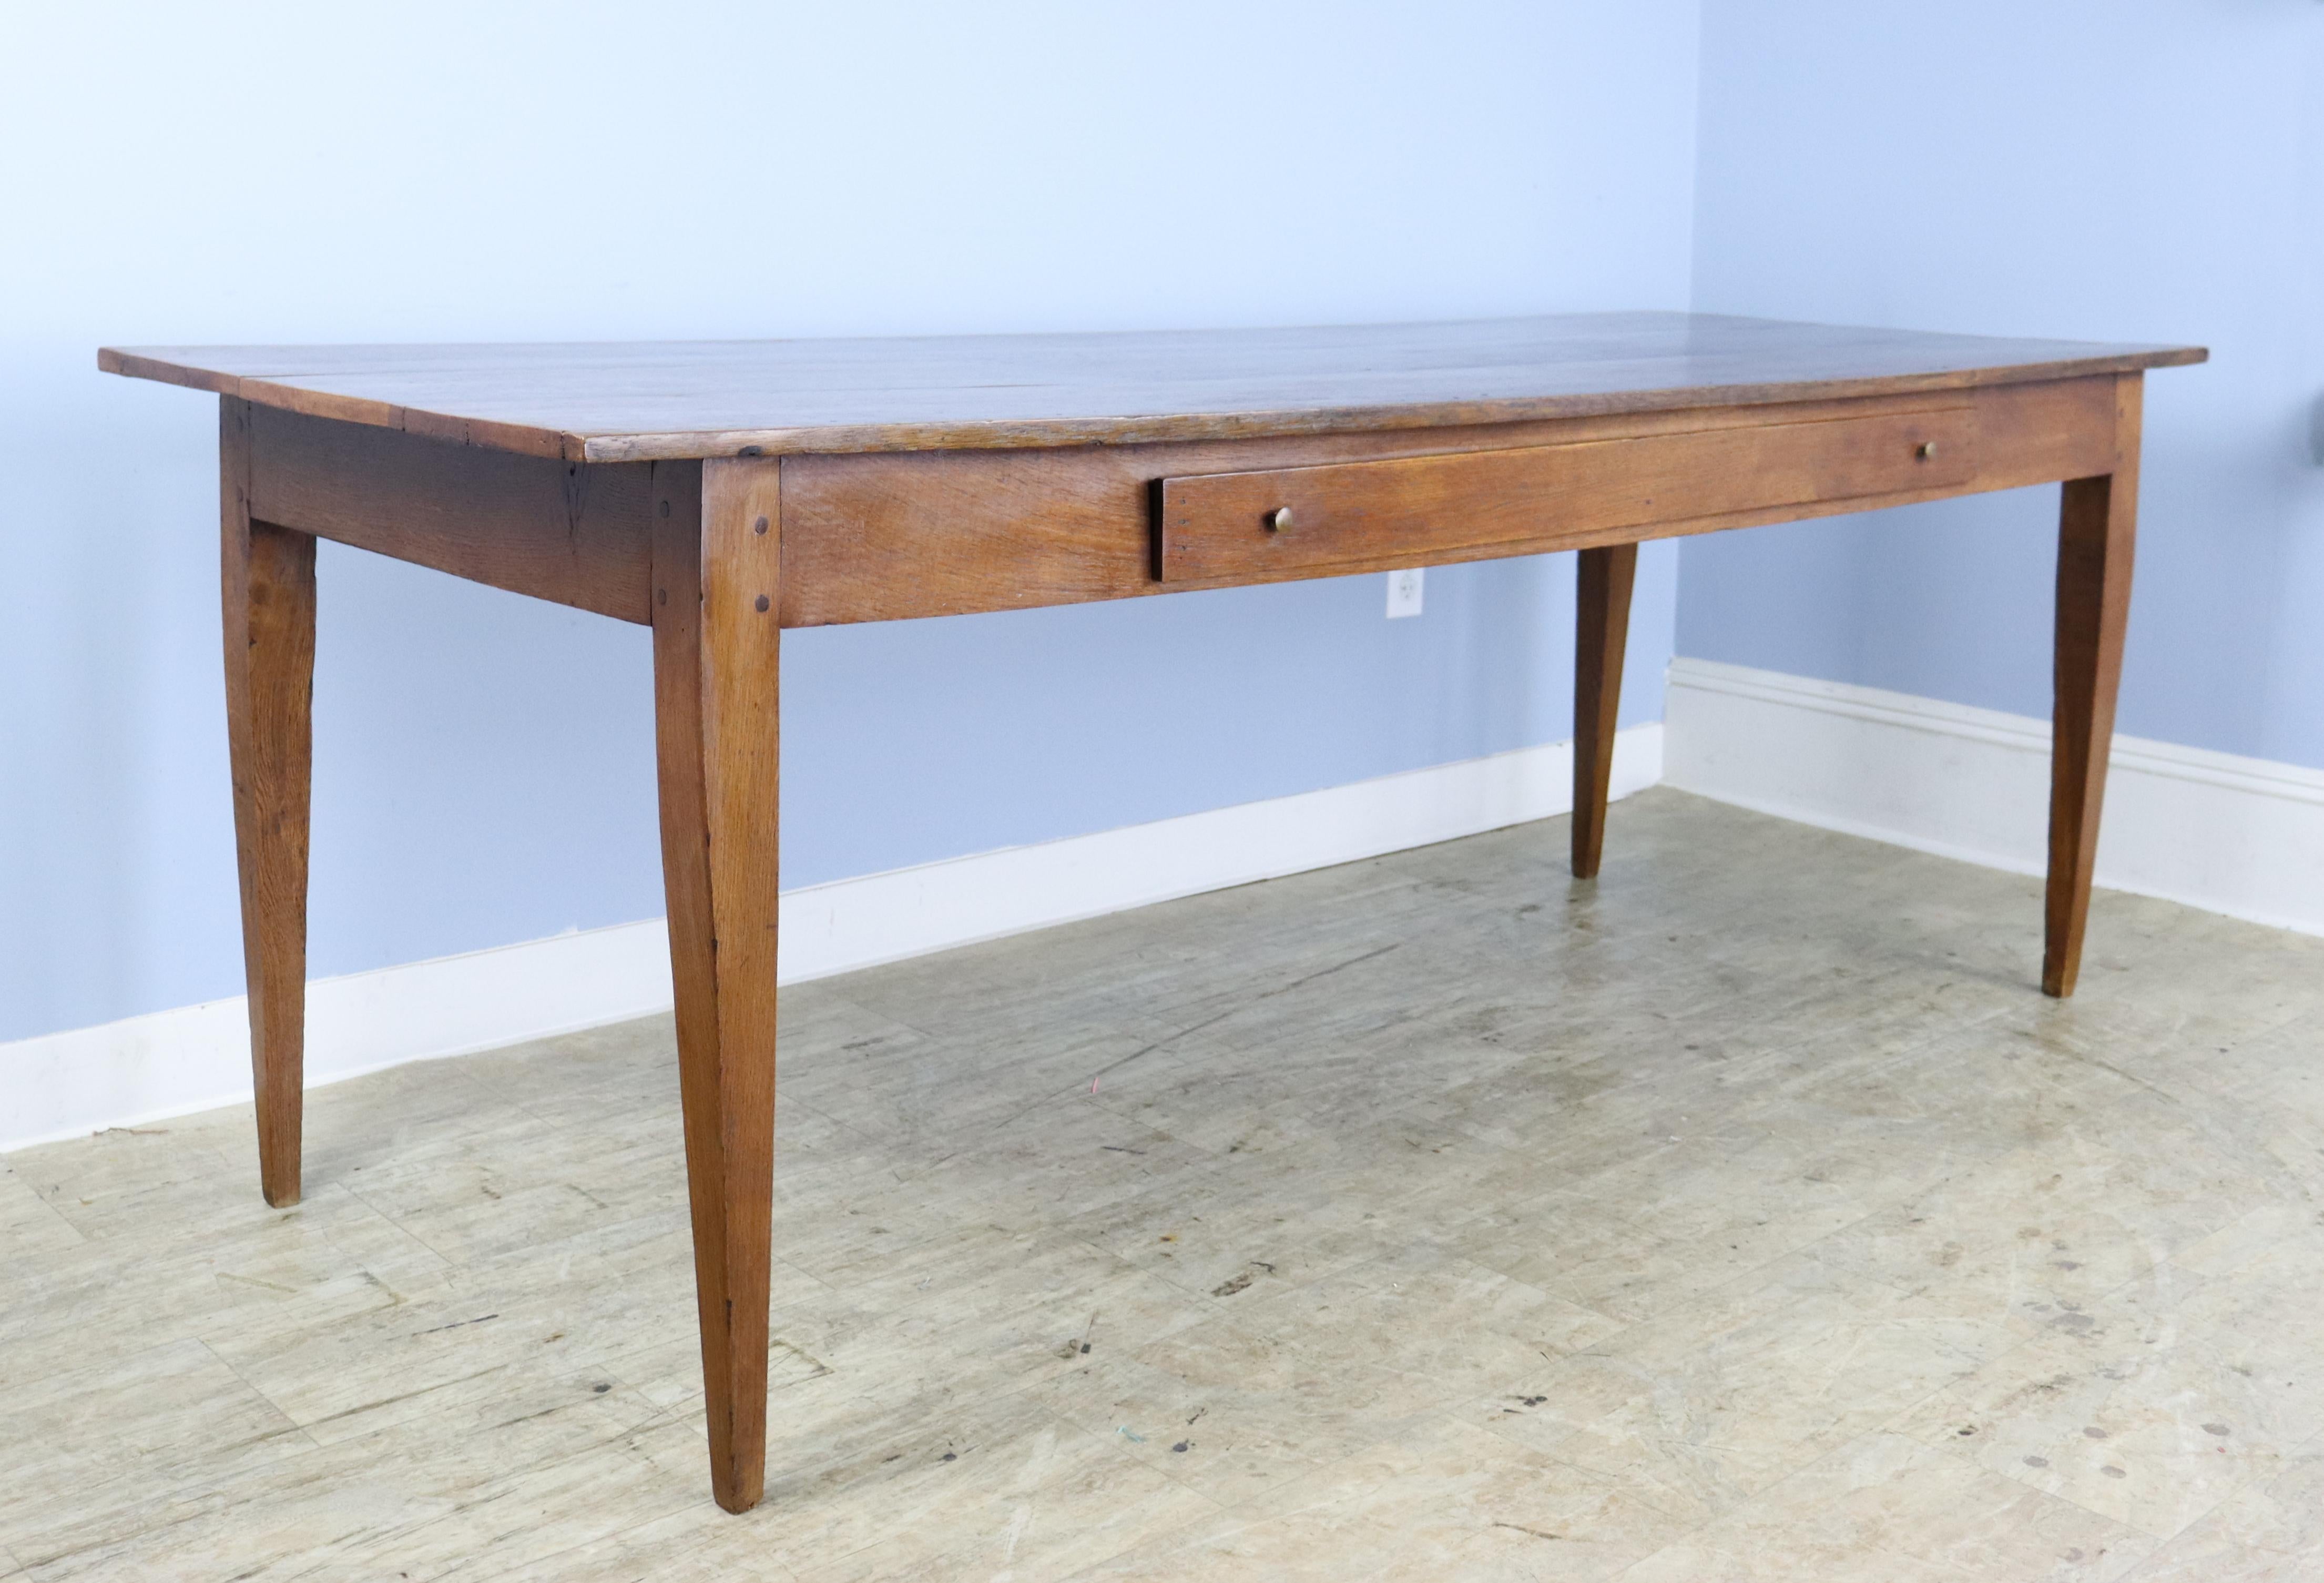 A long elegant oak farm table with an unusual long narrow single drawer. Great color and grain on the table top and classsic tapered legs, nicely pegged at the apron, which is a comfortable 24 inches. There are 71.25 inches between the legs on the